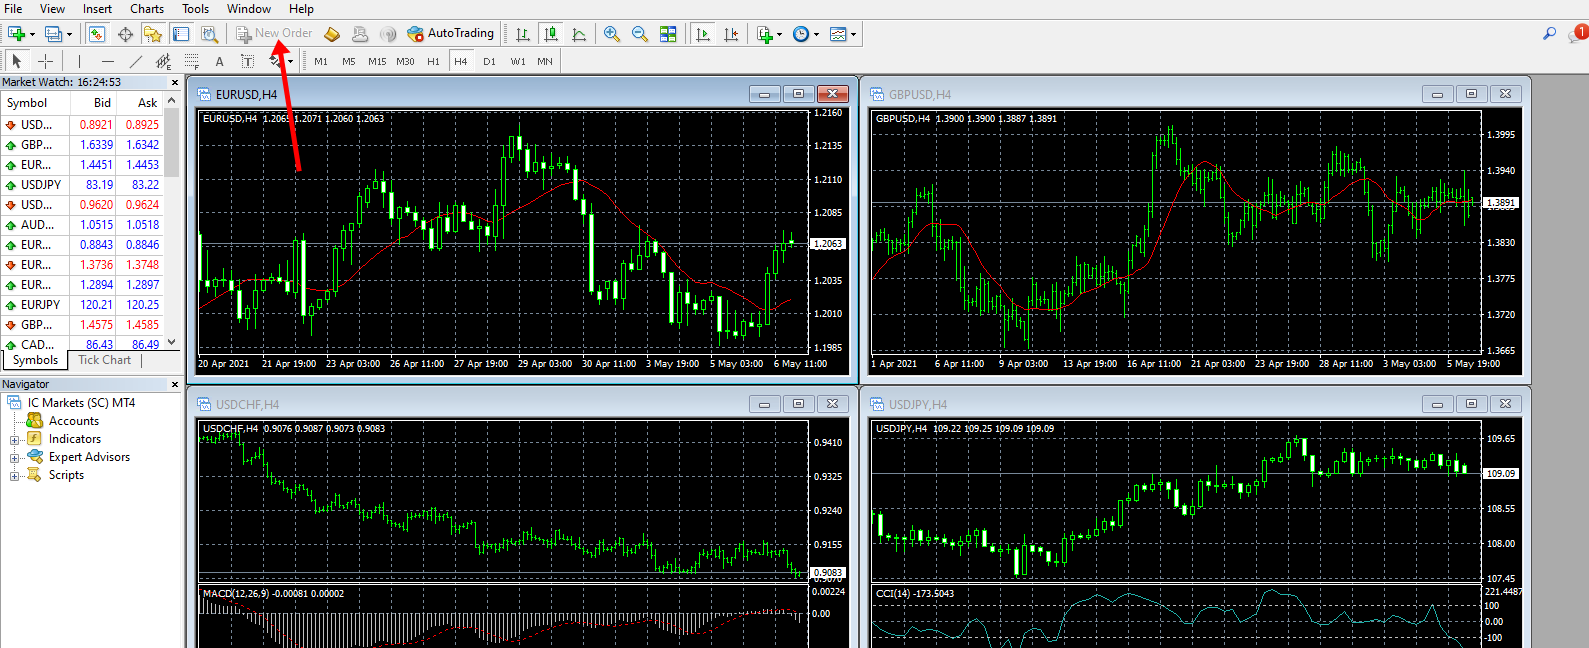 How to place a trade on the MetaTrader 4